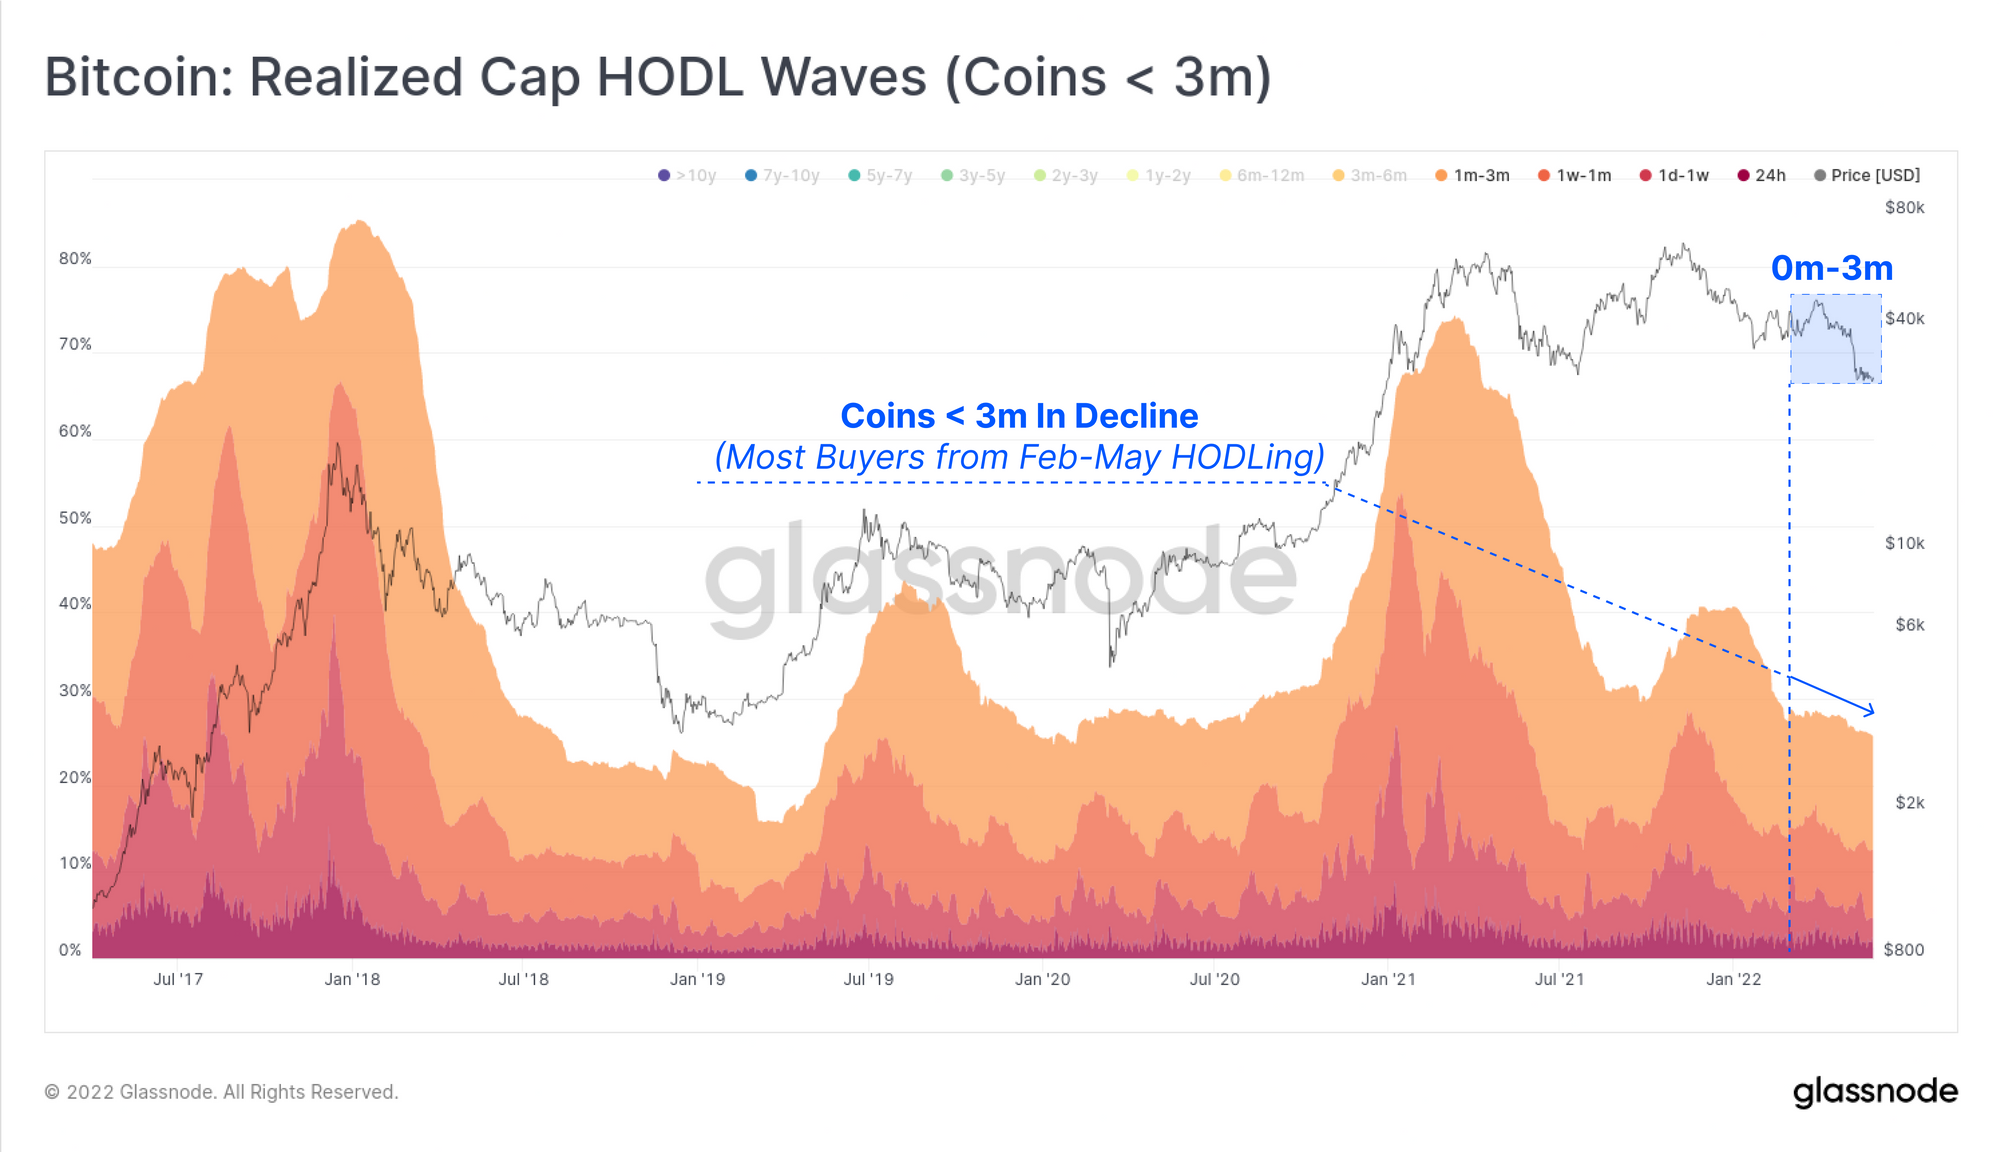 Bitcoin: Realized Cap HODL Waves (Coin < 3m)